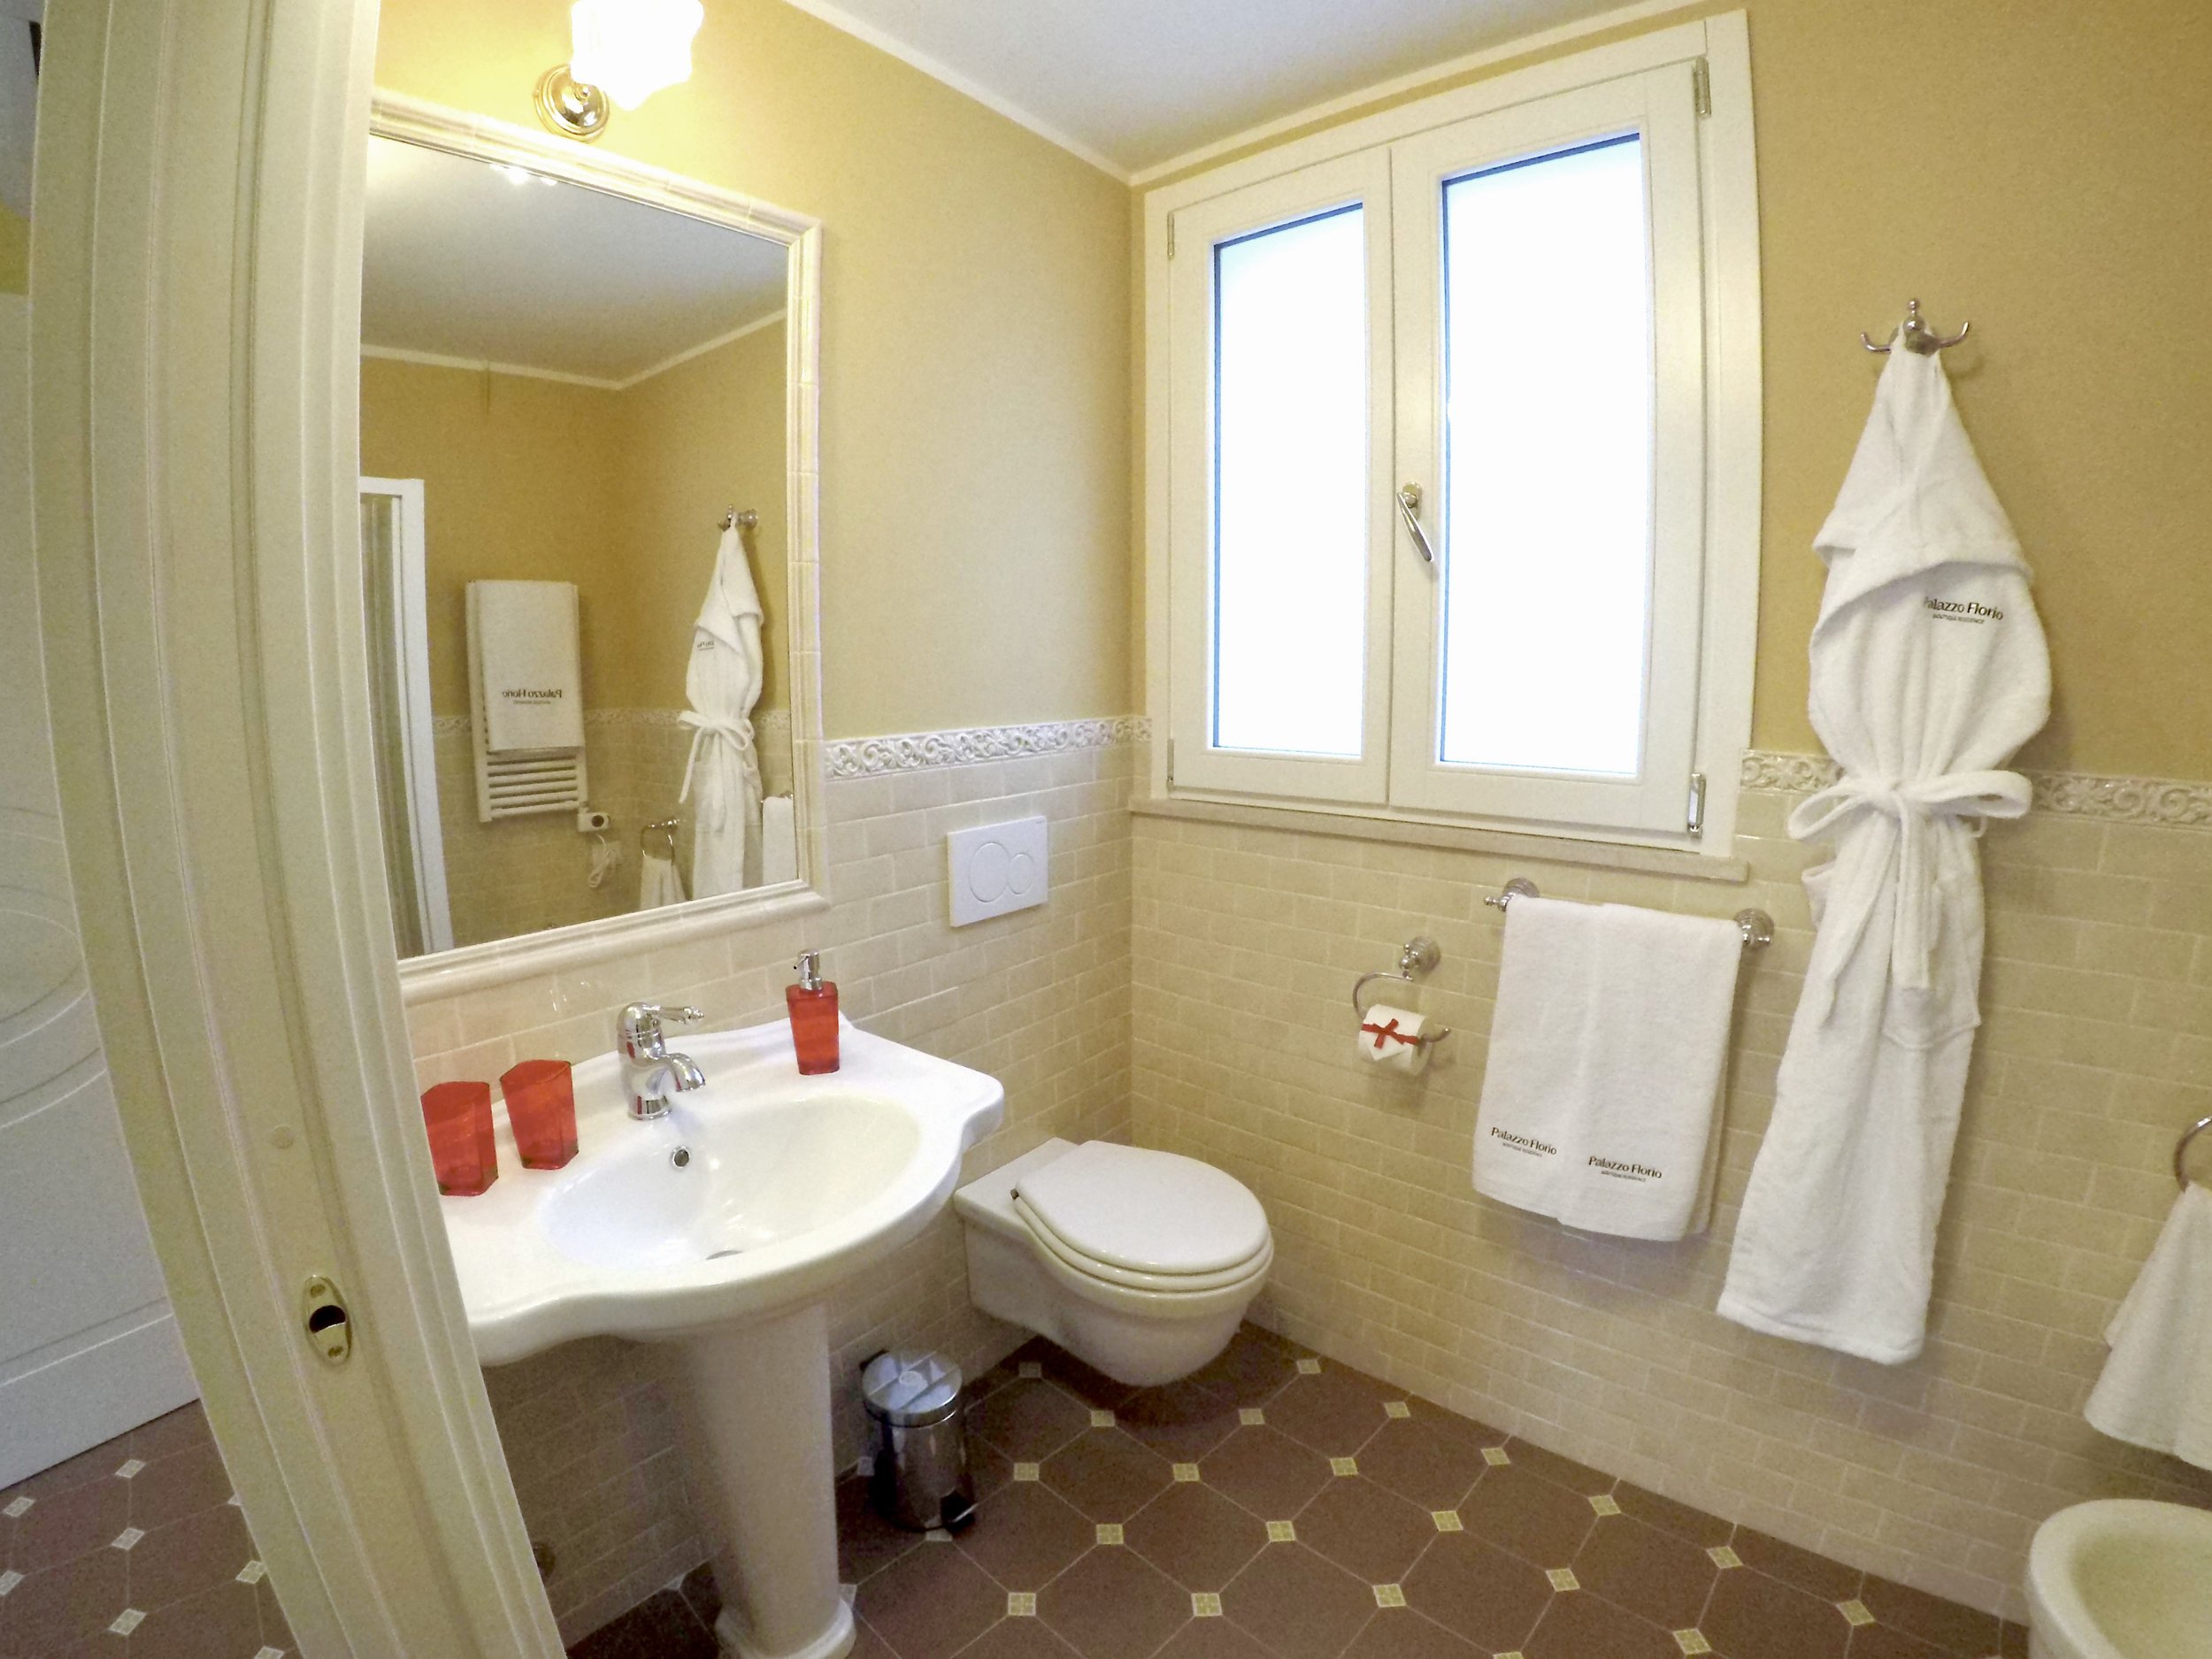 Entry view of Superior Queen room's bathroom in Liberty style